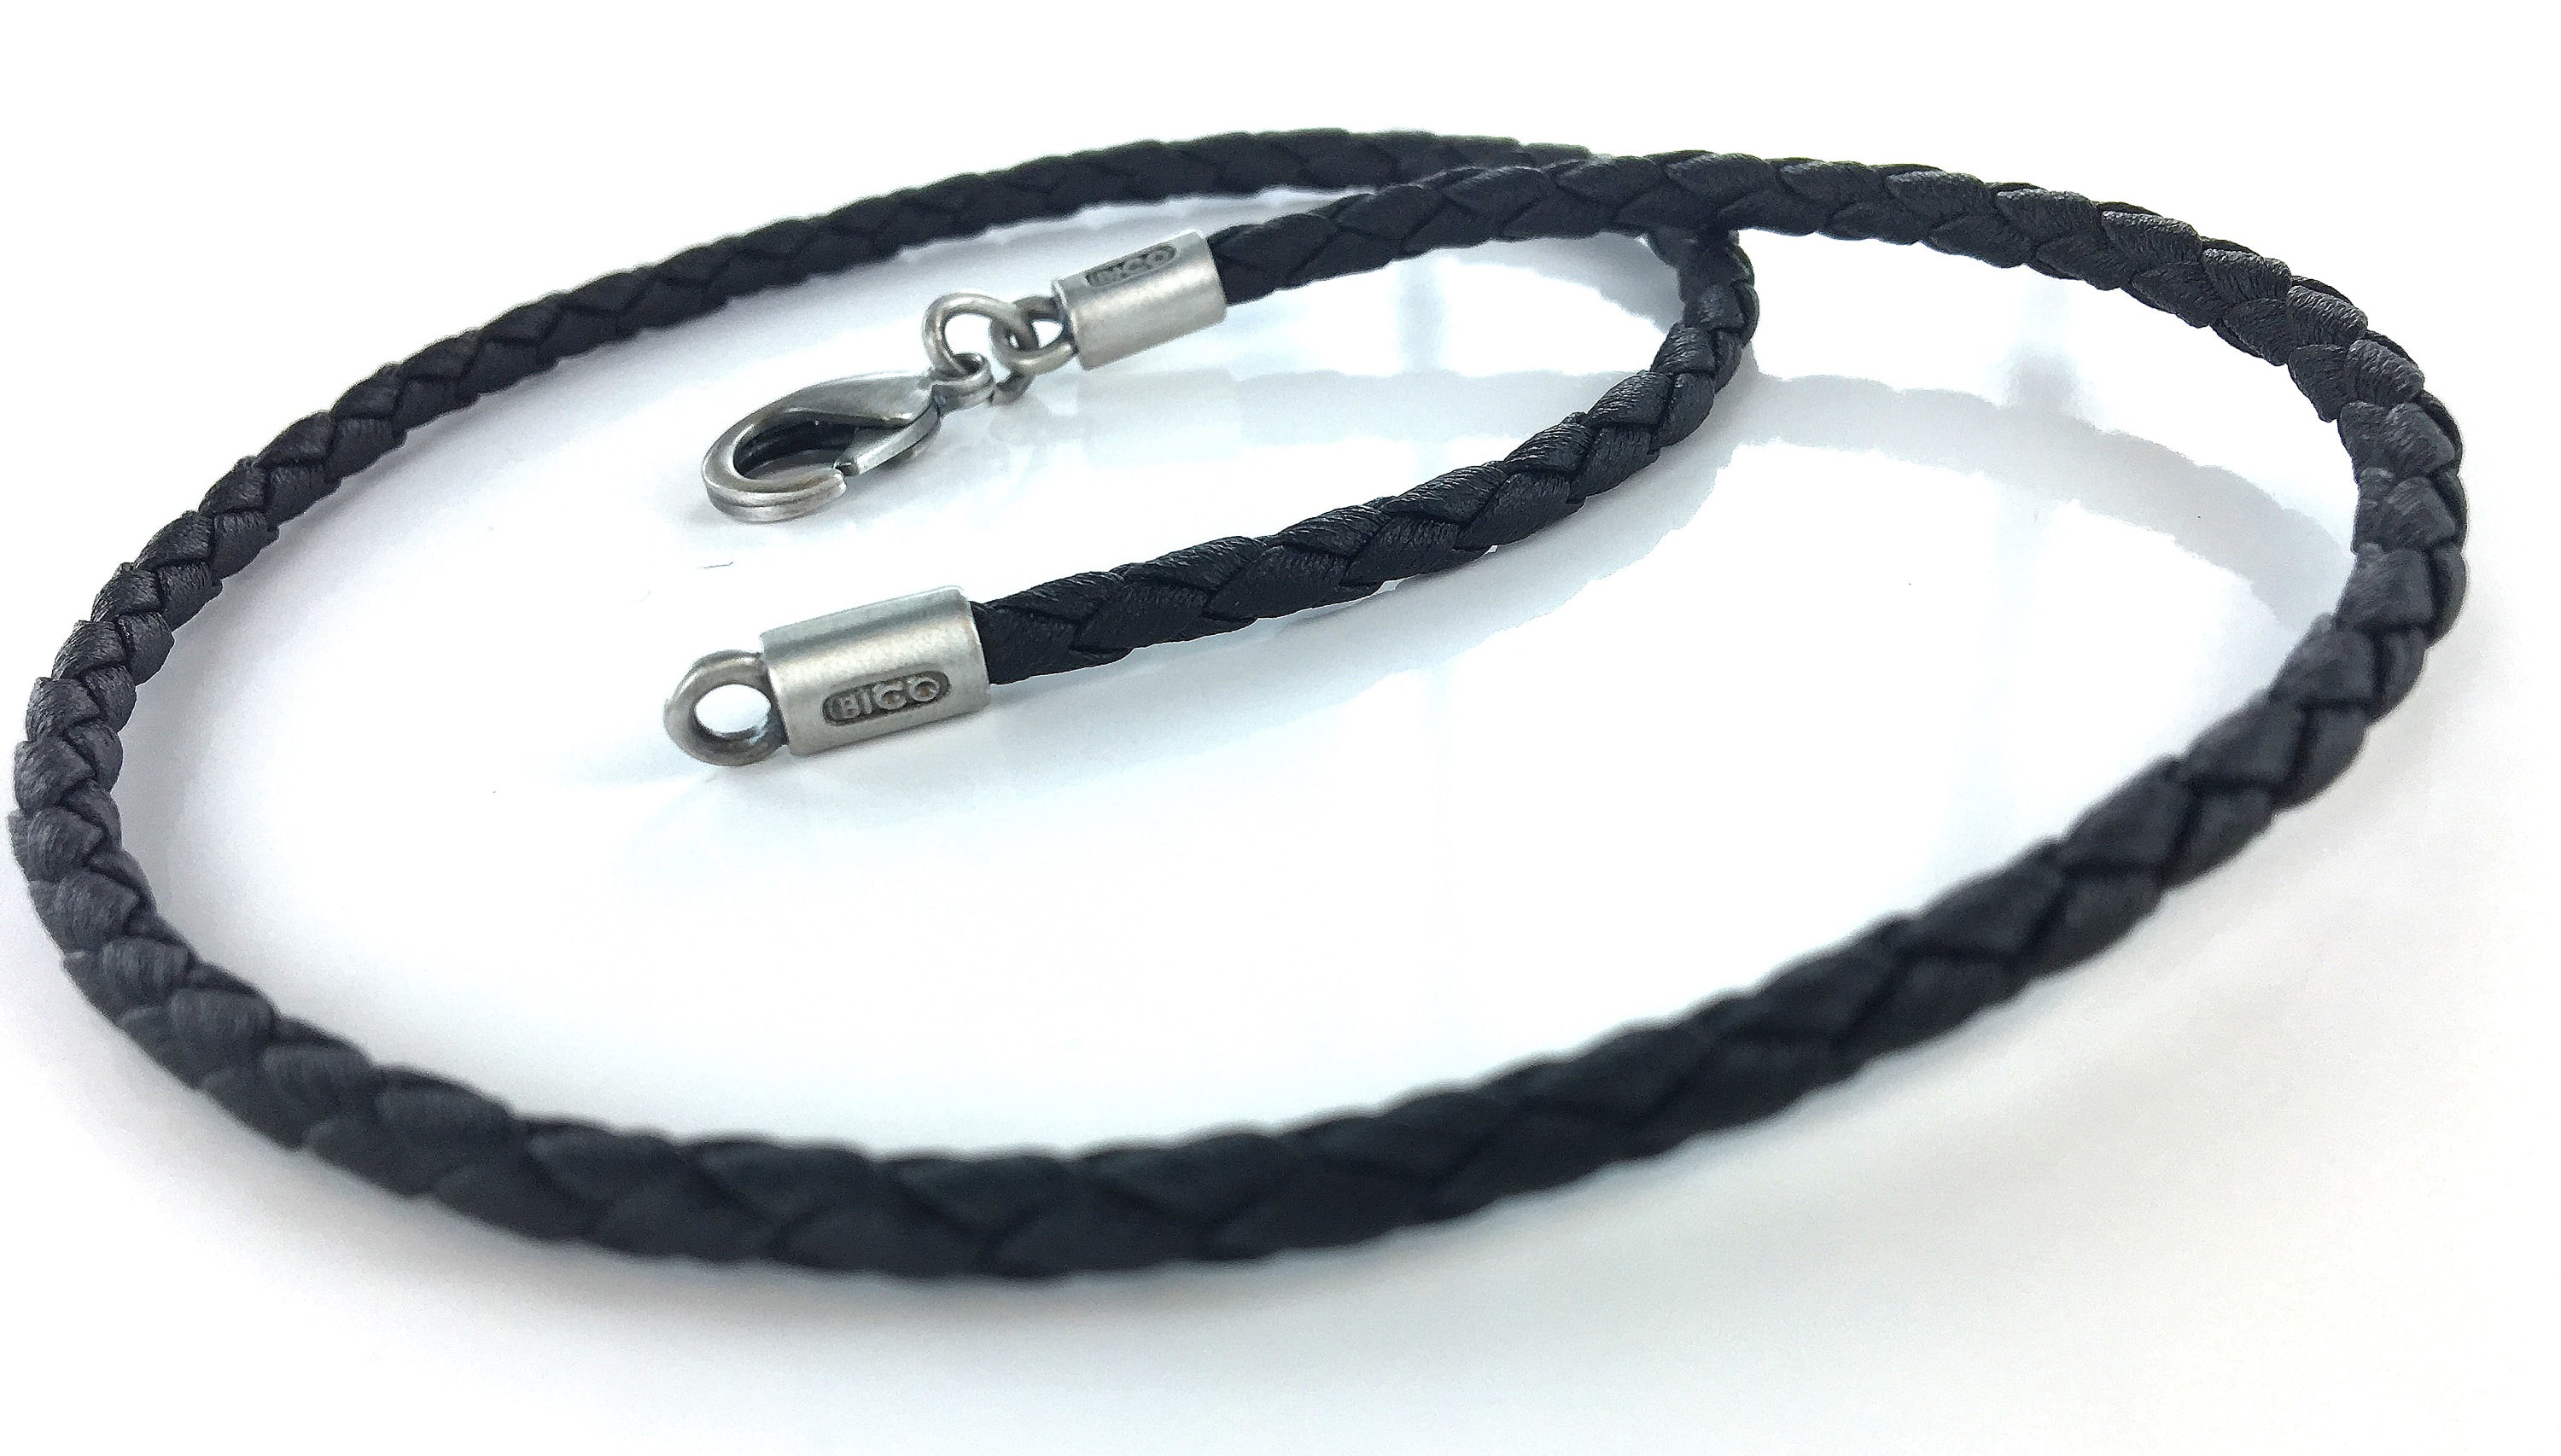 FaithHeart Braided Leather Cord Necklace for Men 2MM Black Woven